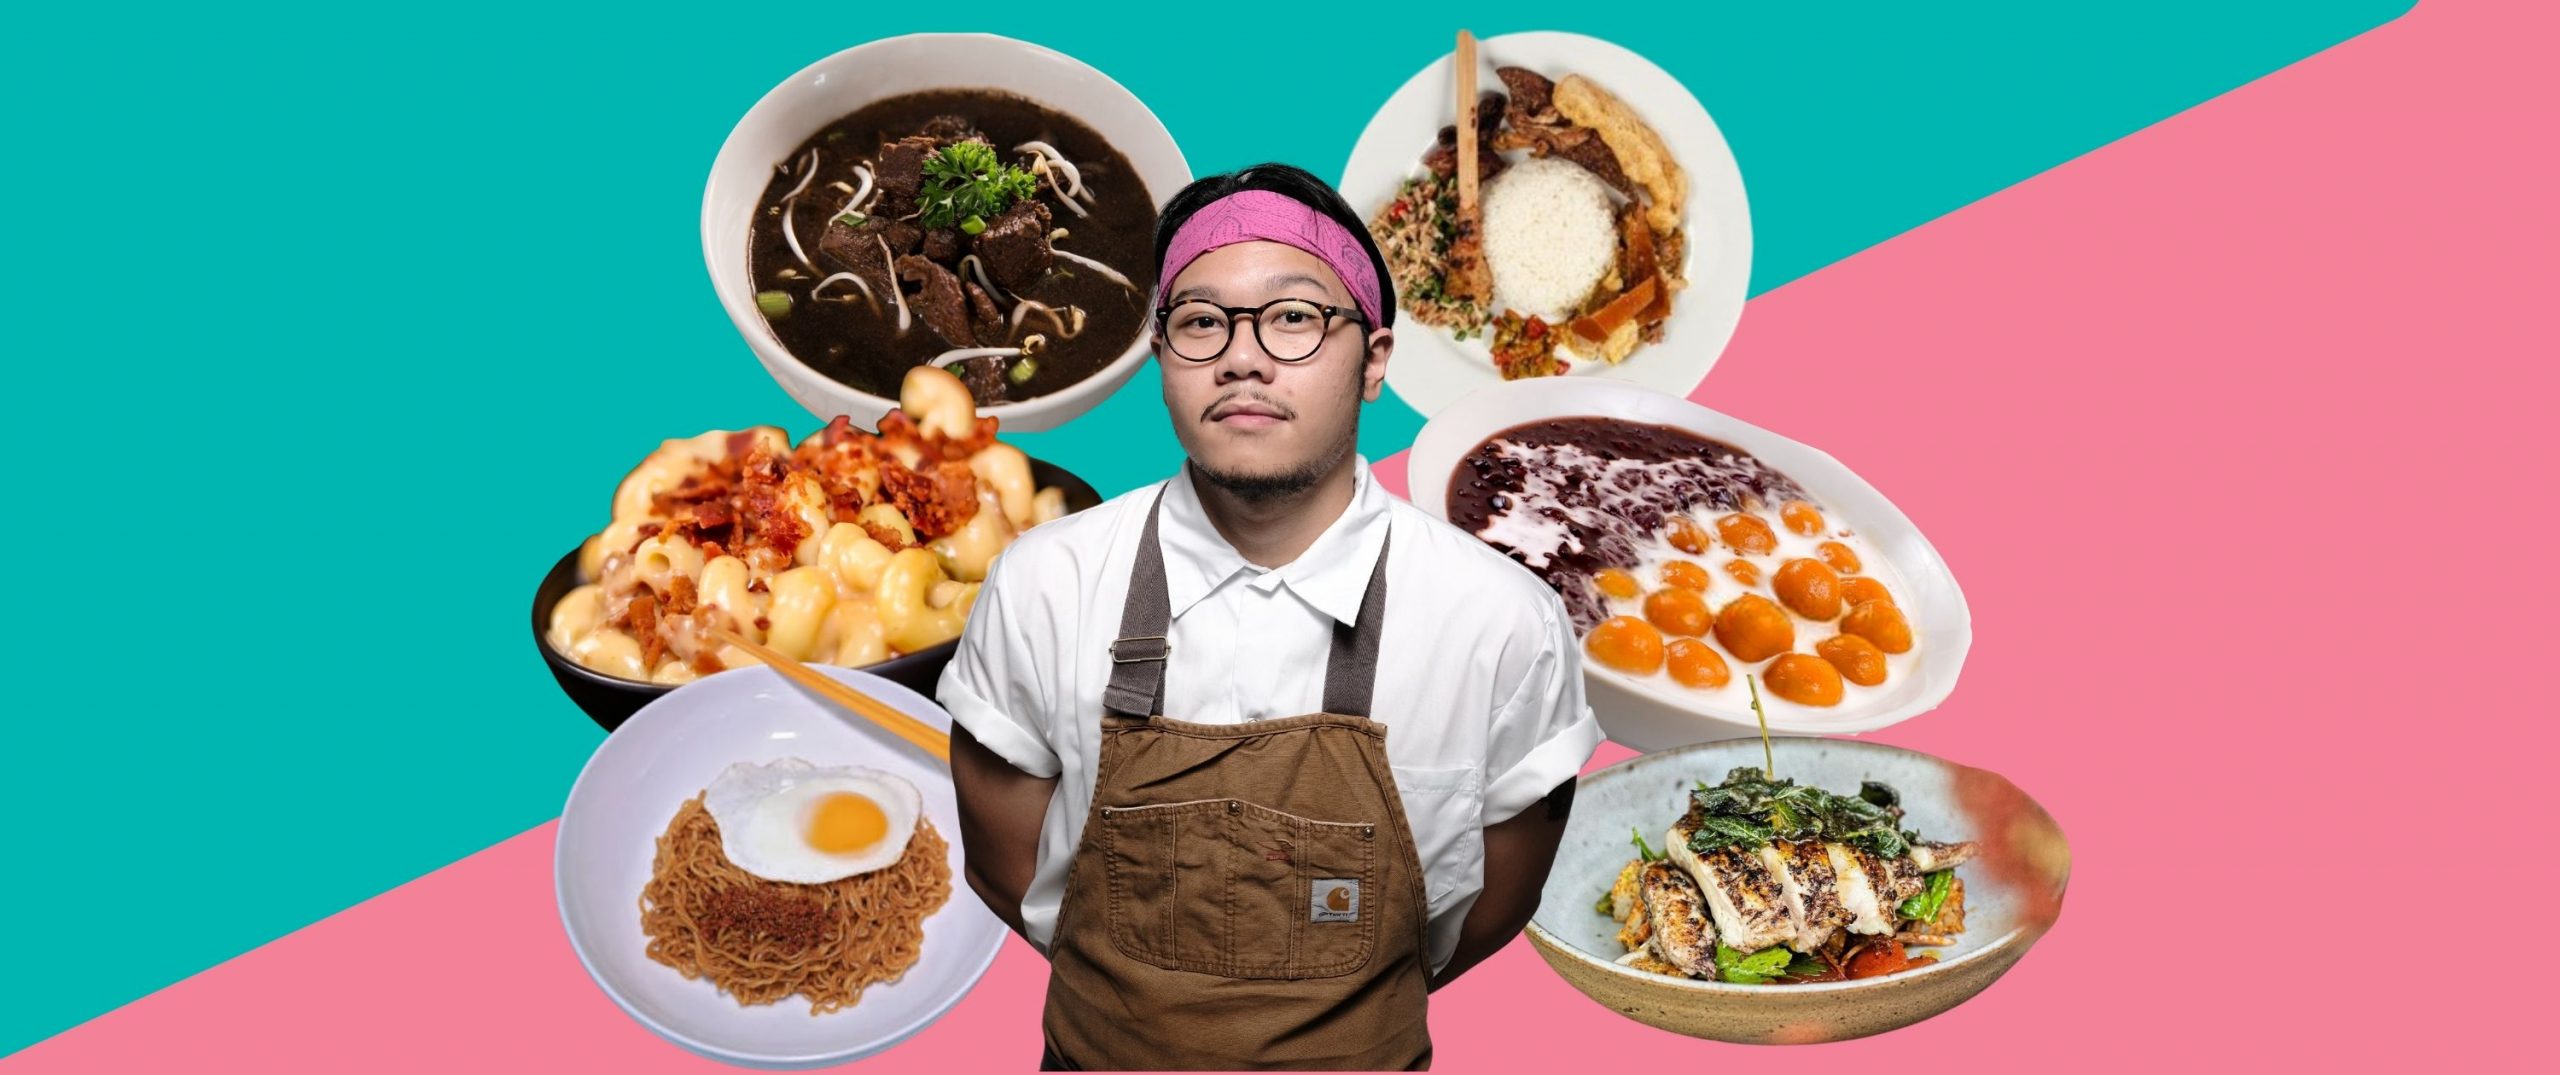 What Chef Eat: Adrian Aryo Bismo